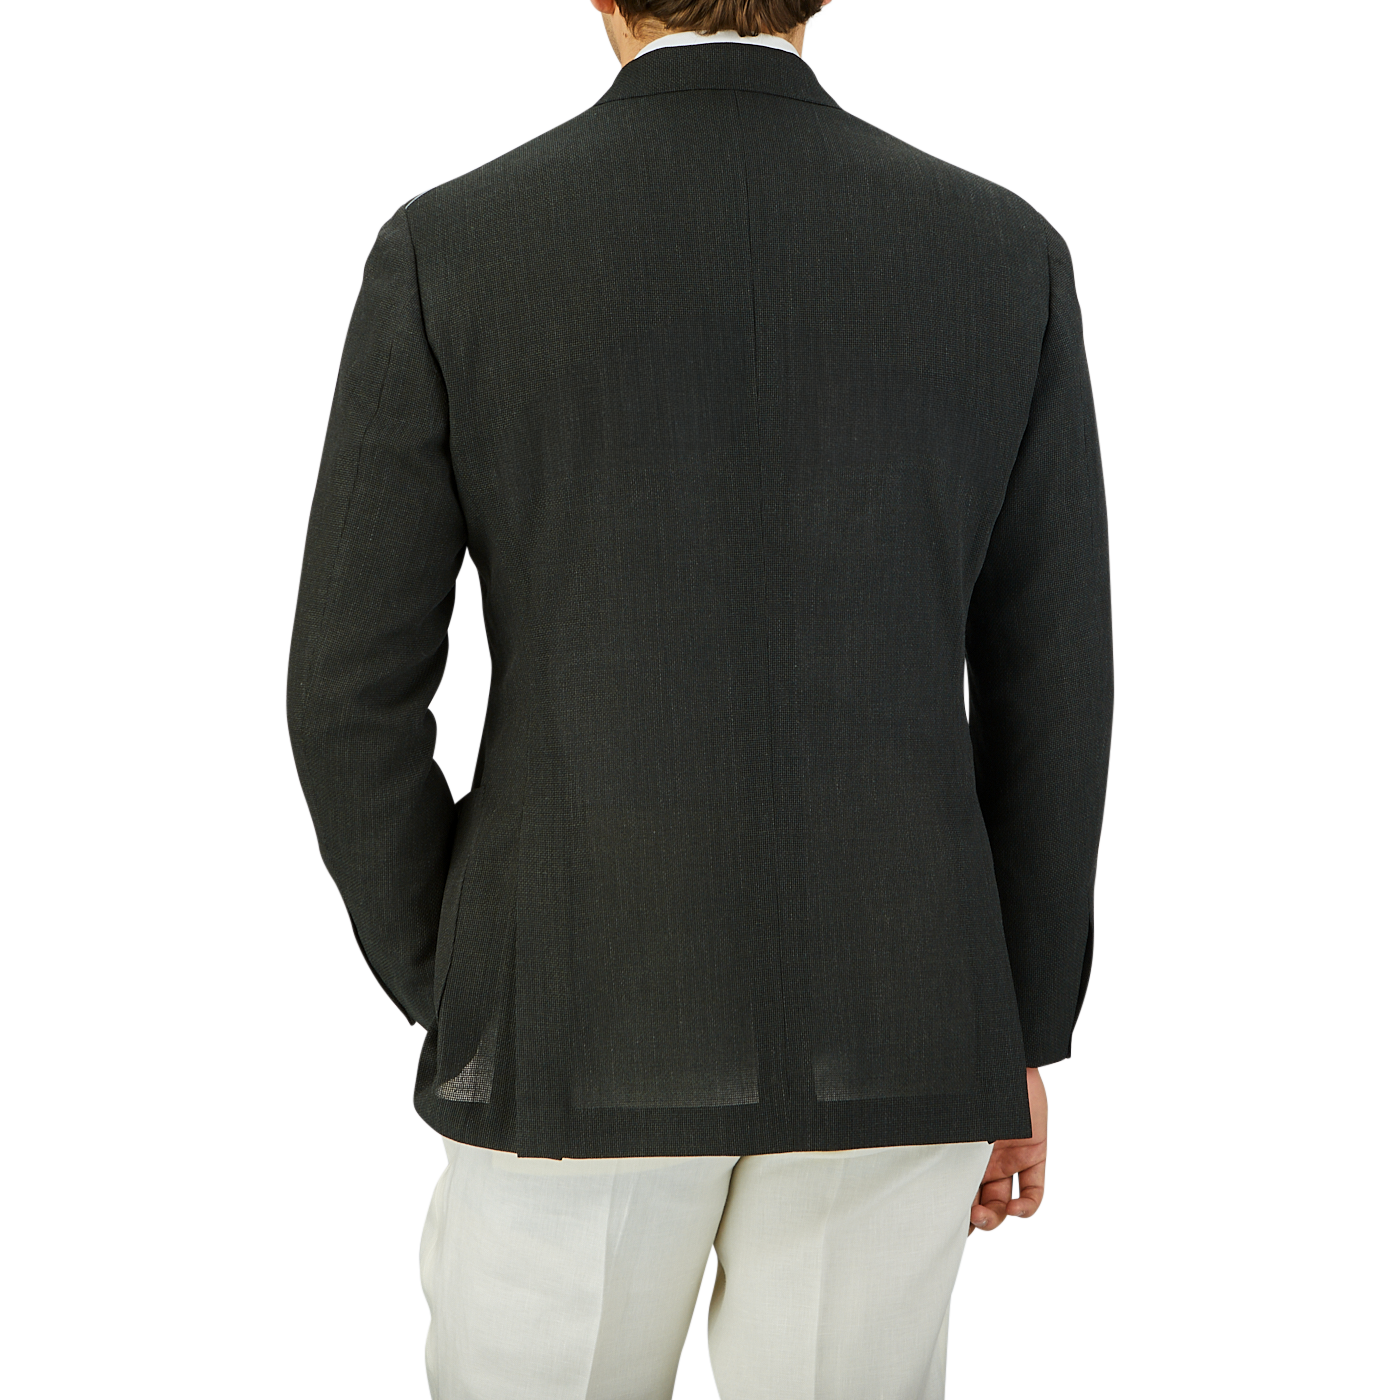 A man seen from behind, wearing a Ring Jacket dark green wool balloon travel blazer and white pants, standing against a plain grey background.